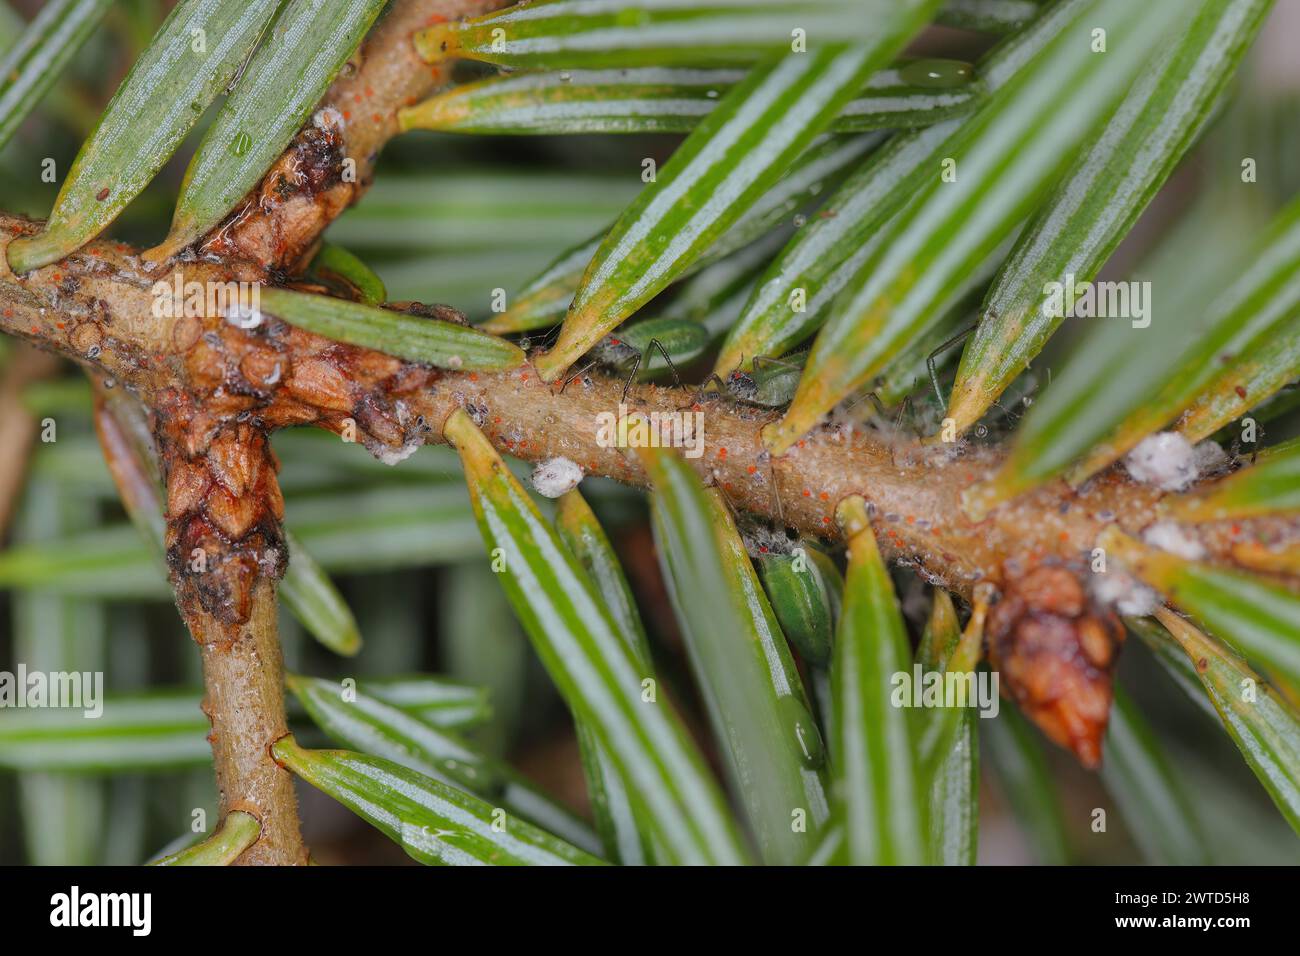 Green striped fir aphid (Cinara pectinatae) on fir (Abies alba) twig with needles. Stock Photo